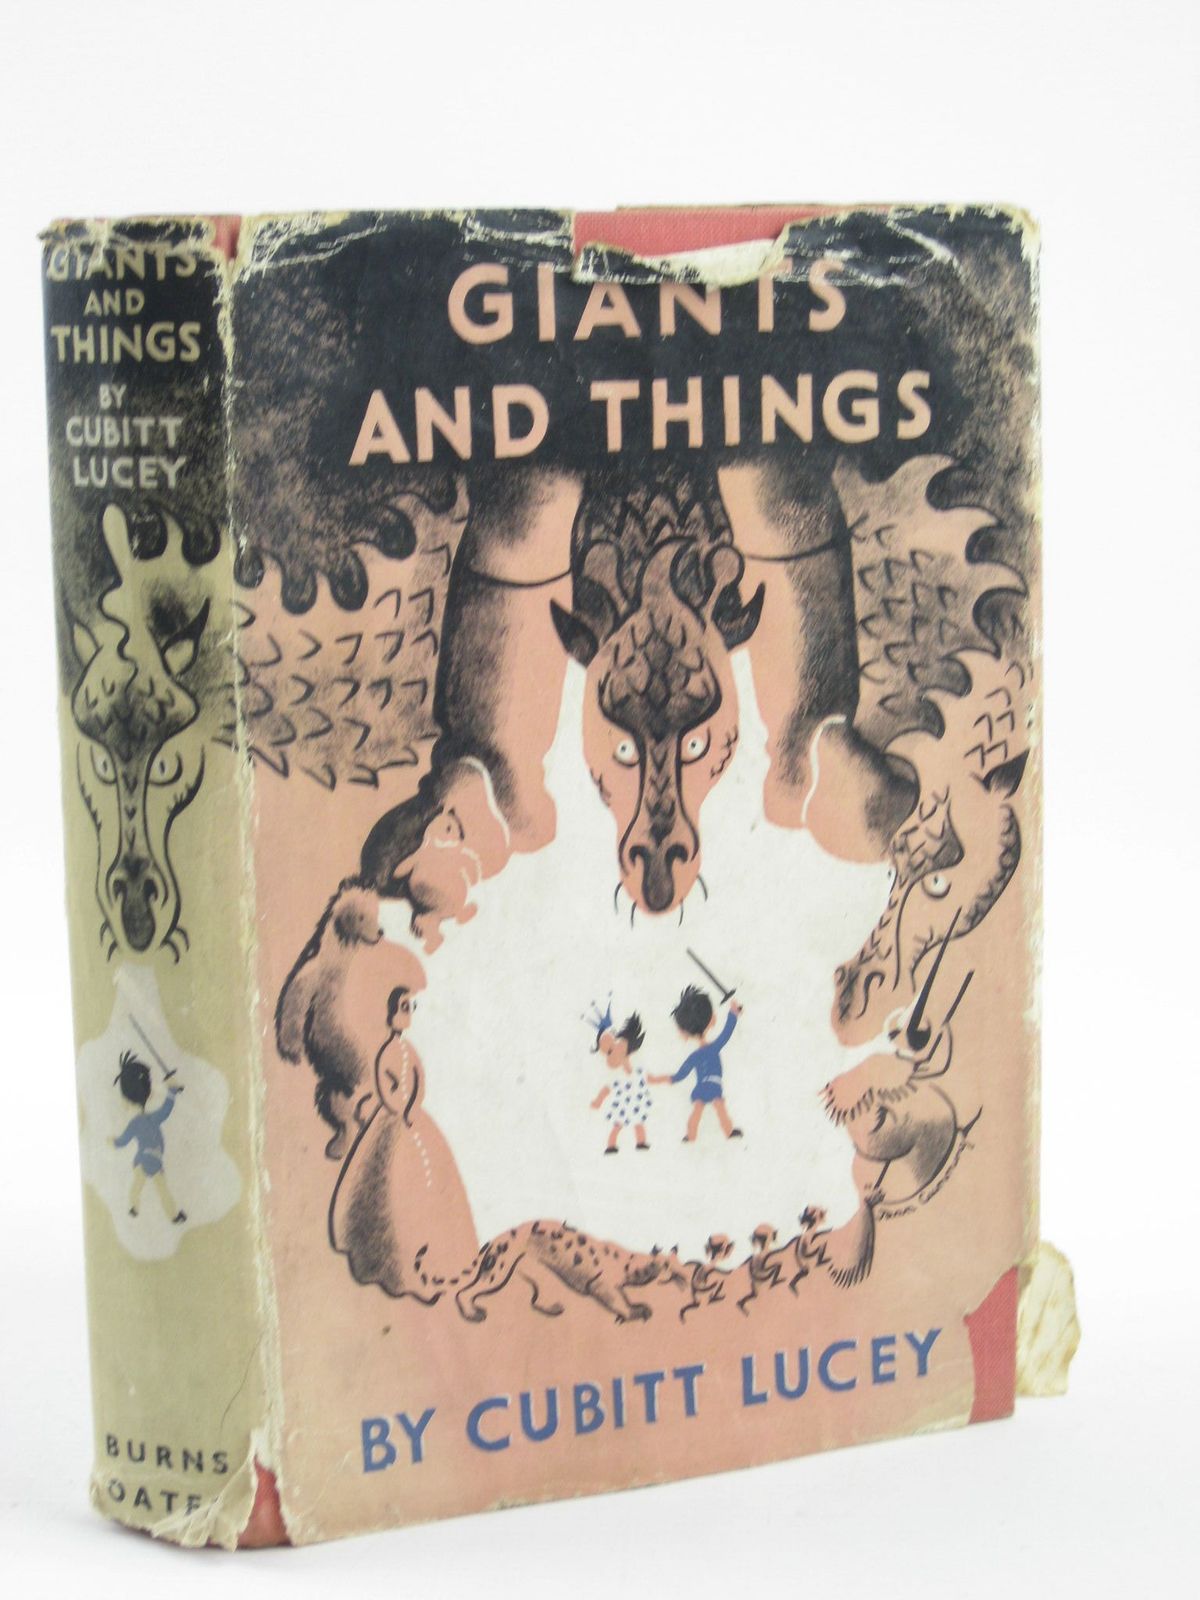 Cover of GIANTS AND THINGS by Cubitt Lucey